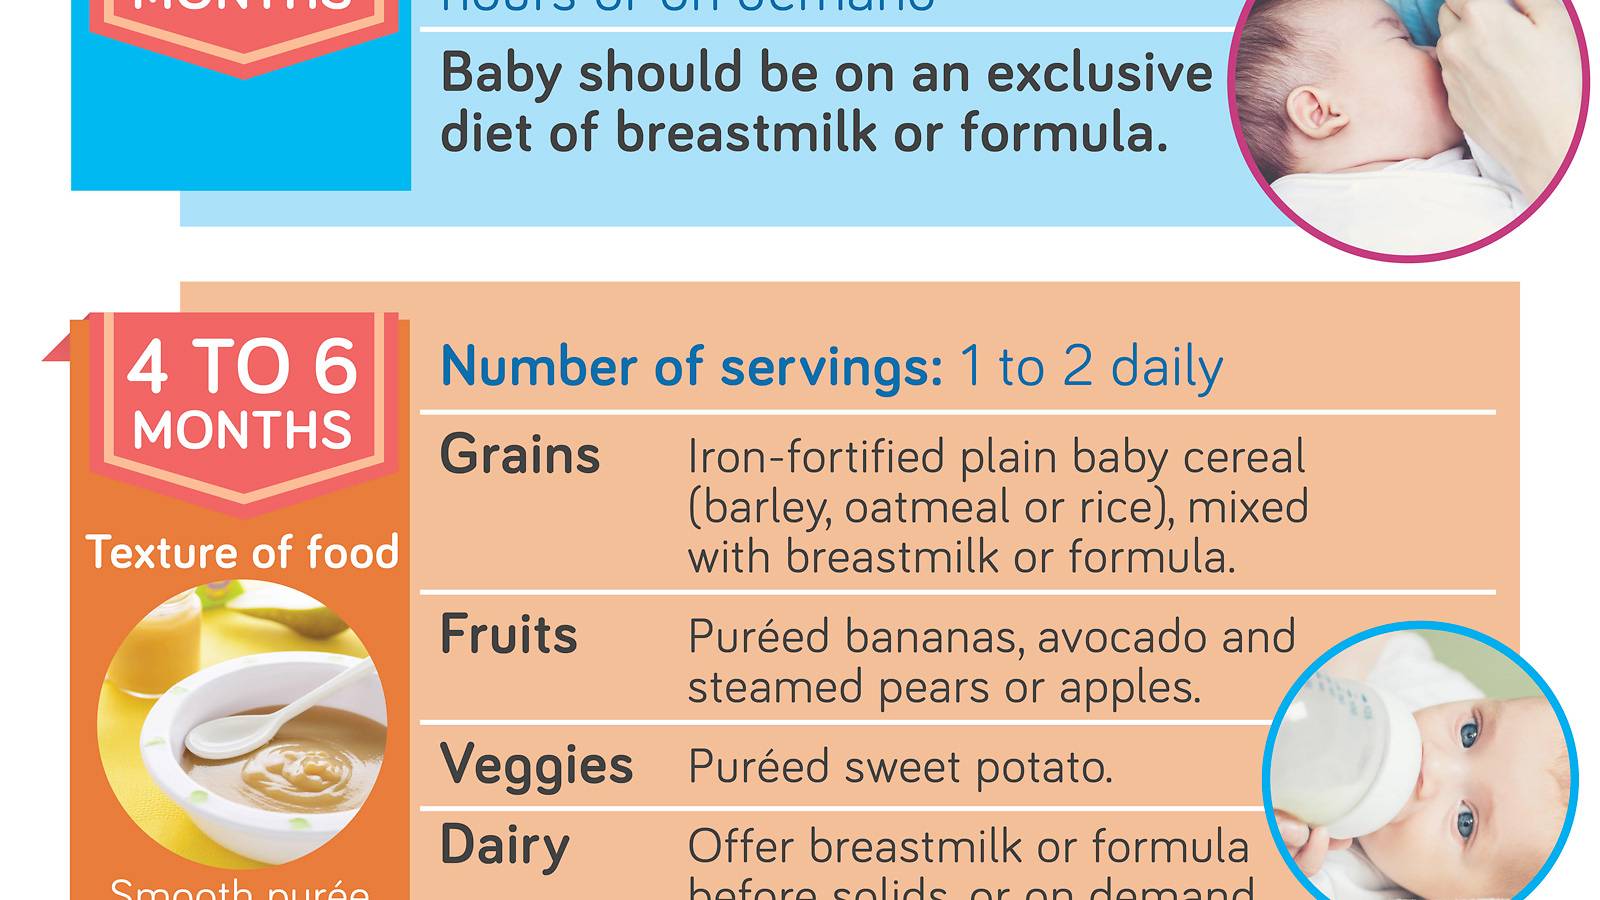 https://www.smartparents.sg/sites/default/files/image_resources/image-9308282-24acbf06f699d653d56b3bac148864b7-babies-your-by-month-guide-to-feeding-baby-infographics-2.jpg